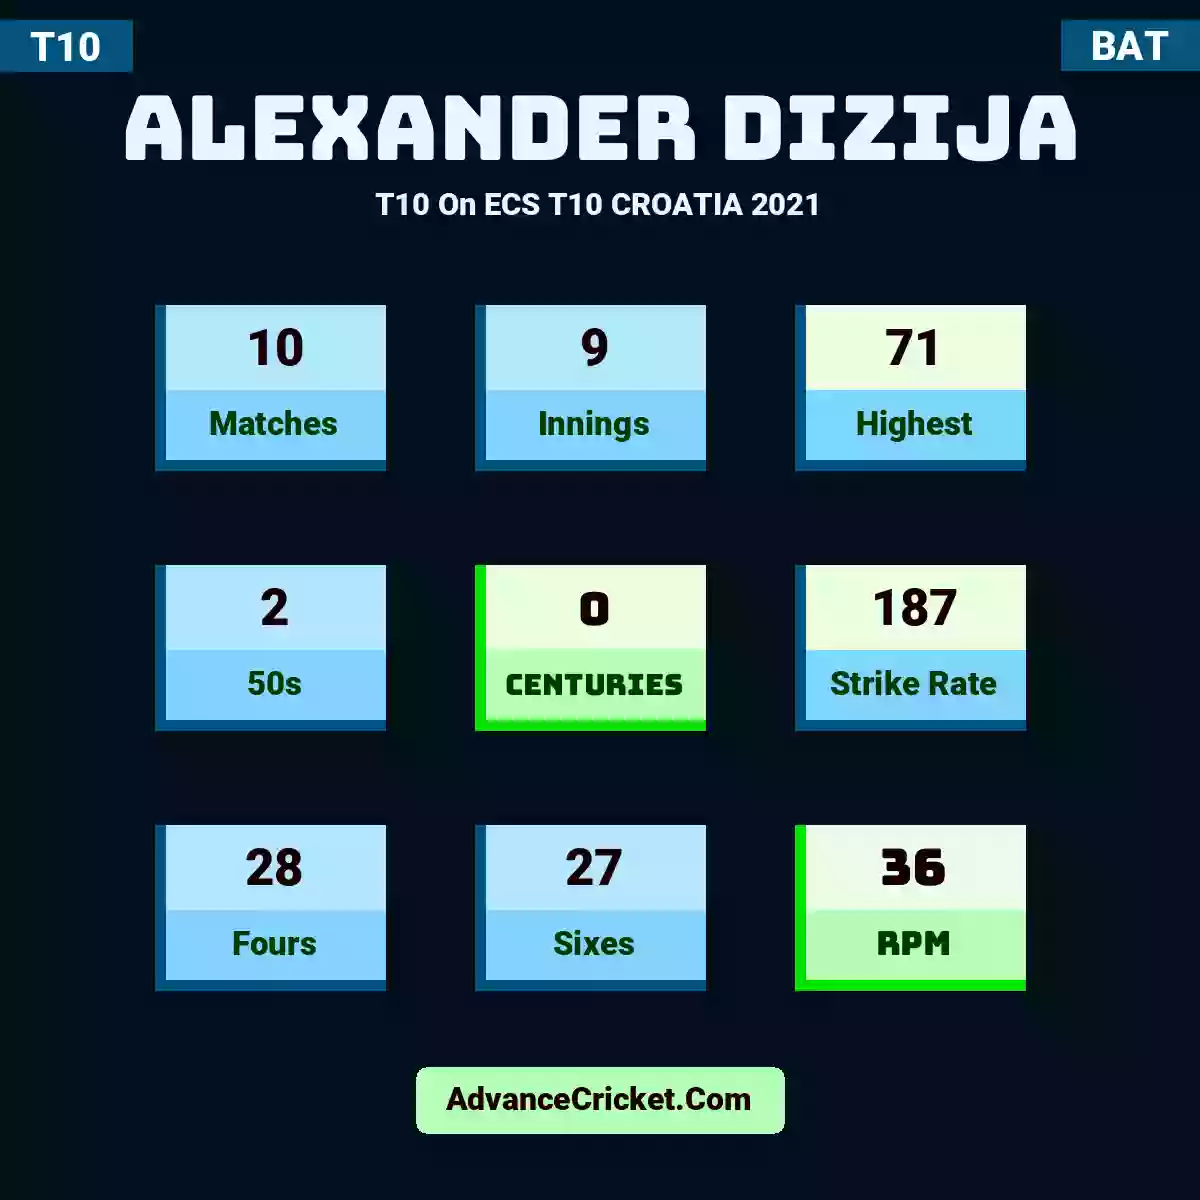 Alexander Dizija T10  On ECS T10 CROATIA 2021, Alexander Dizija played 10 matches, scored 71 runs as highest, 2 half-centuries, and 0 centuries, with a strike rate of 187. A.Dizija hit 28 fours and 27 sixes, with an RPM of 36.